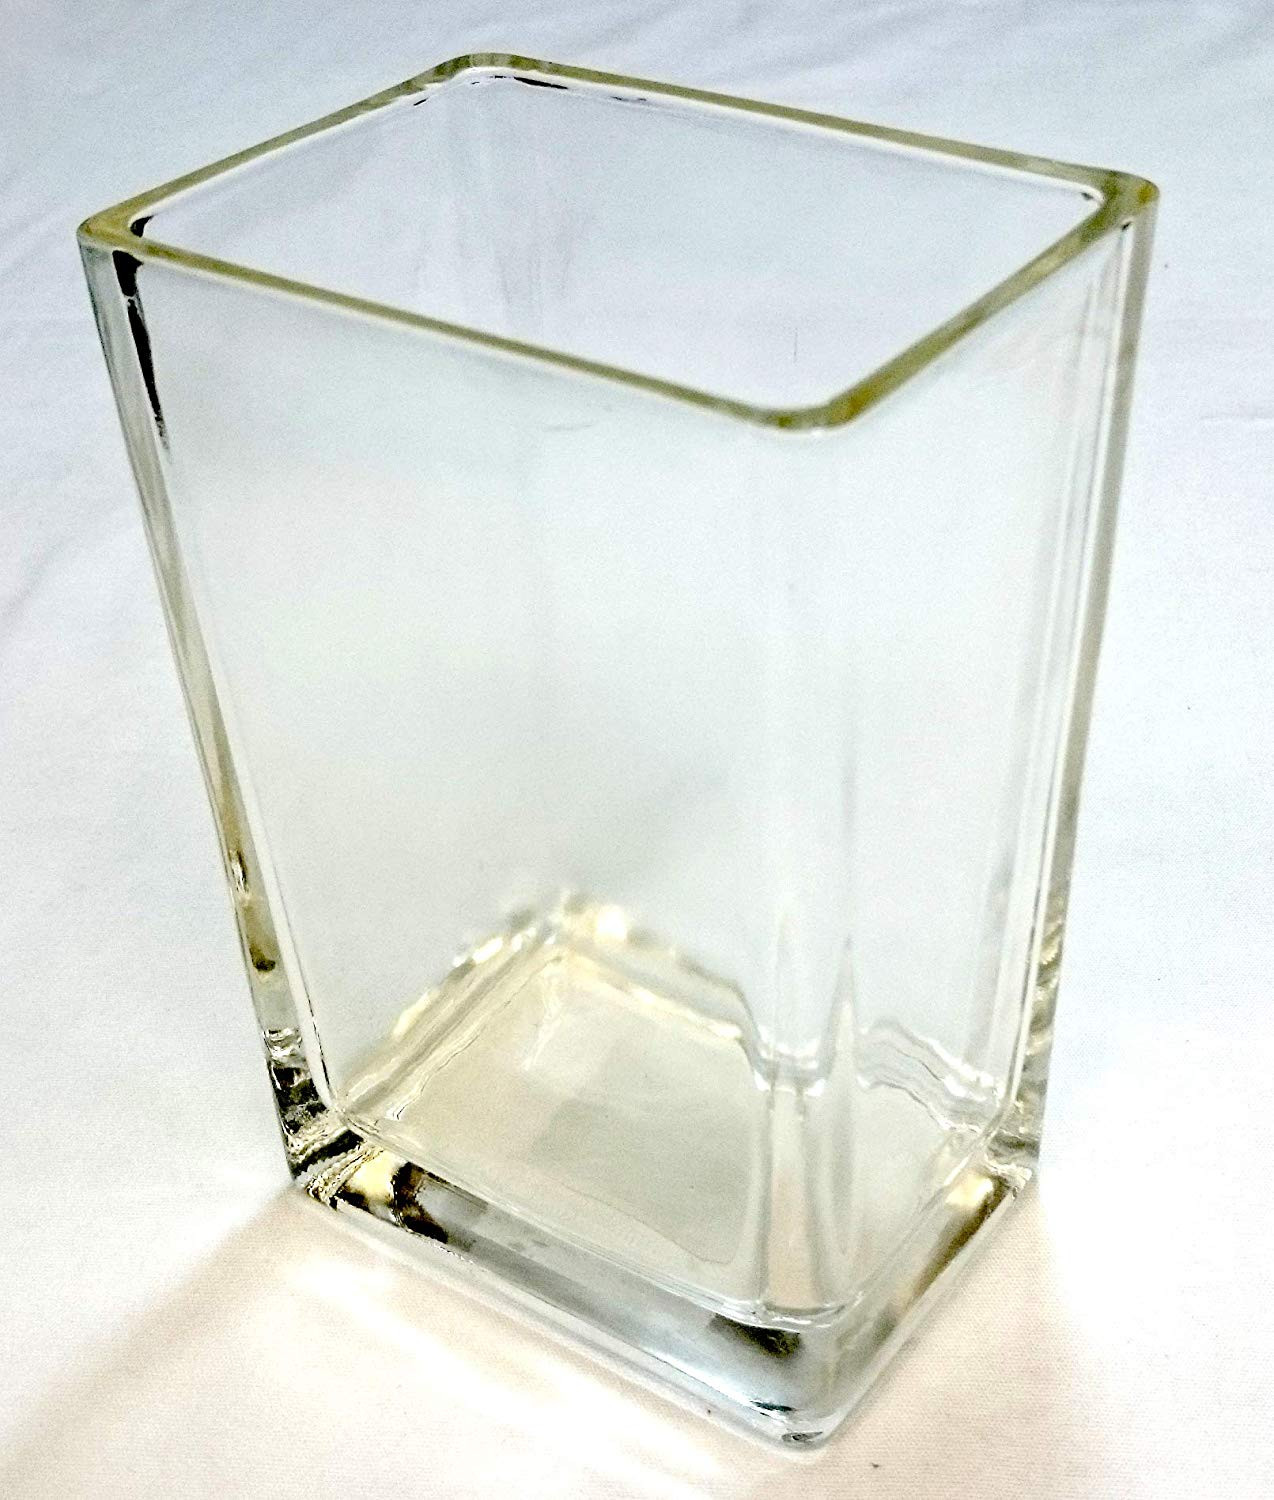 29 Stunning 8 Inch Square Glass Vase 2024 free download 8 inch square glass vase of amazon com concord global trading 6 rectangle 3x4 base glass vase regarding amazon com concord global trading 6 rectangle 3x4 base glass vase six inch high tapere